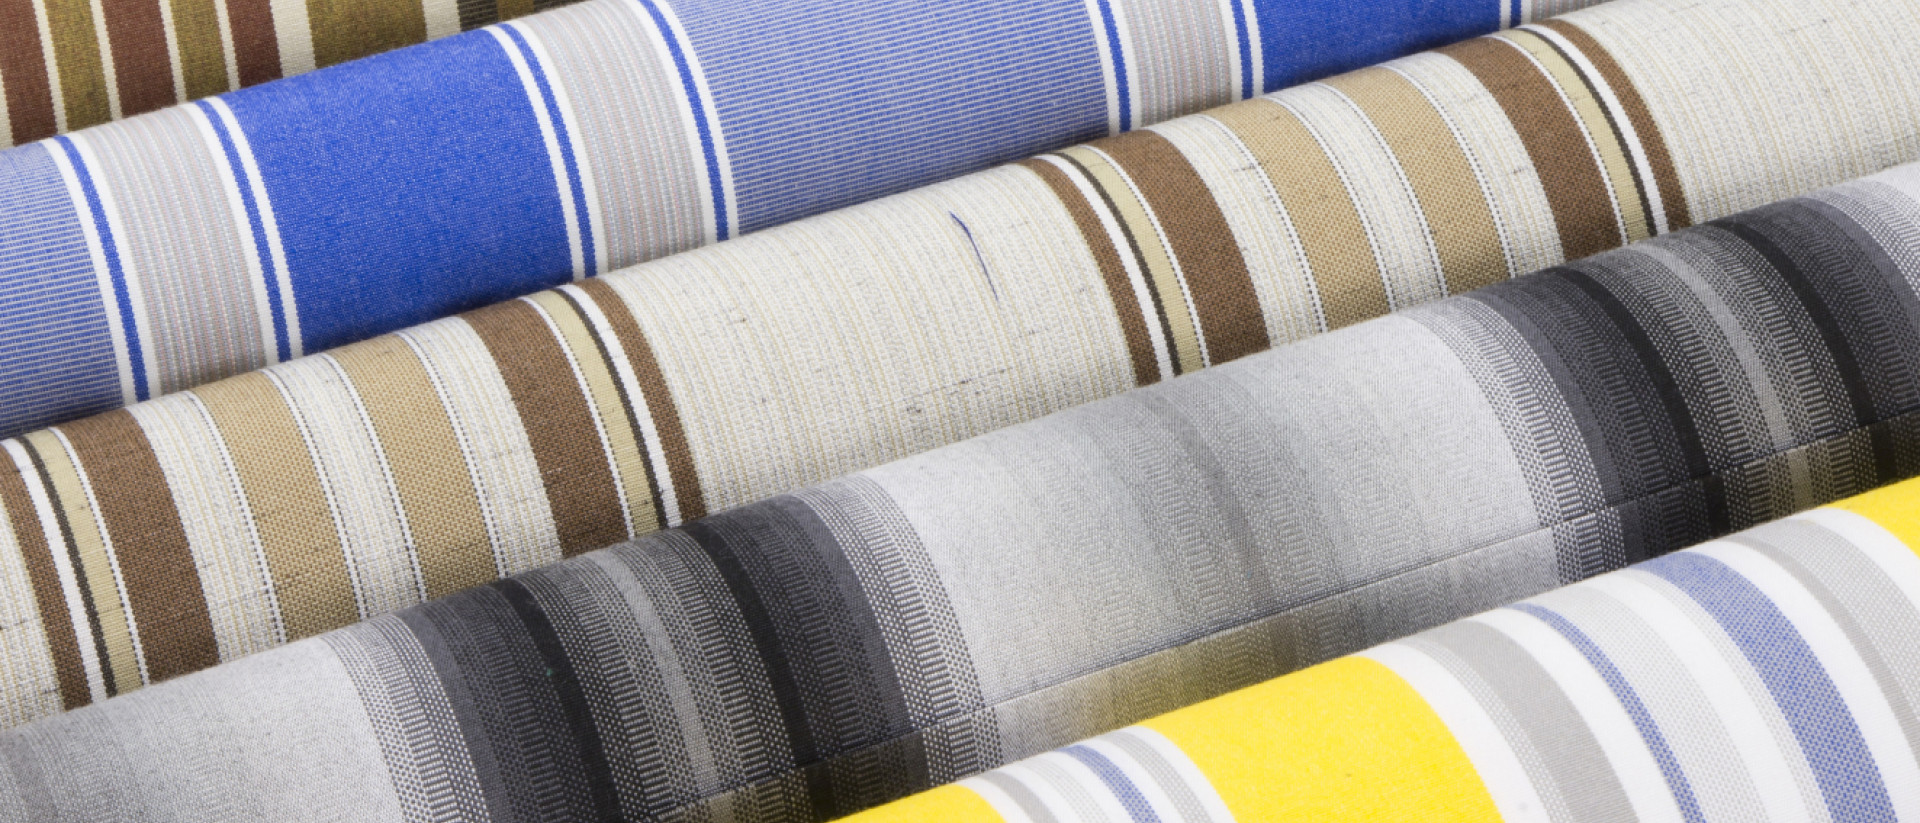 Stripe patterned fabrics rolled up